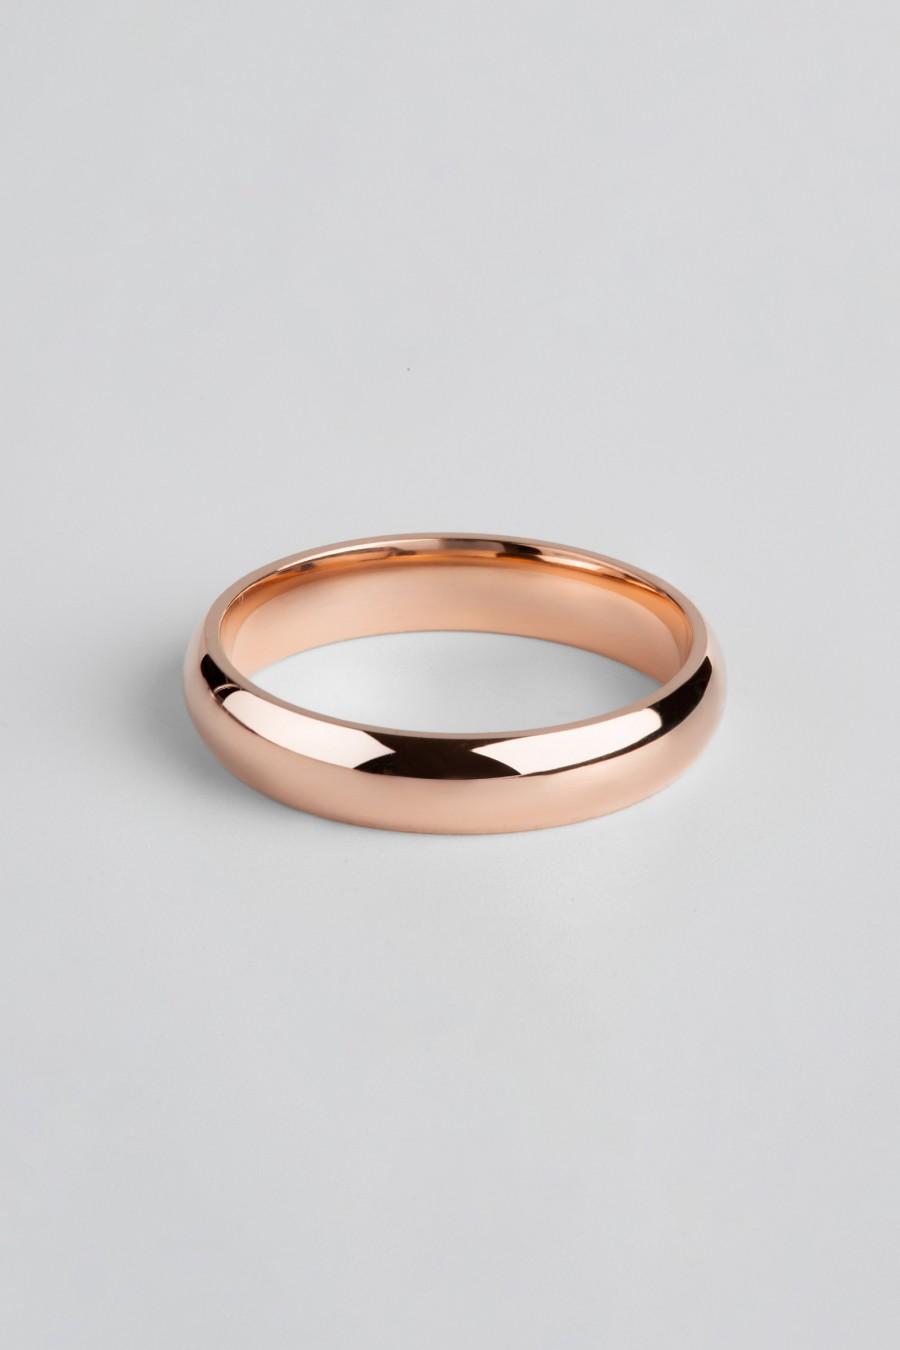 Свадьба - 14k Rose Gold Band - CLASSIC DOME / Polished / Comfort Fit / Men's Women's Wedding Ring / Simple Wedding Ring